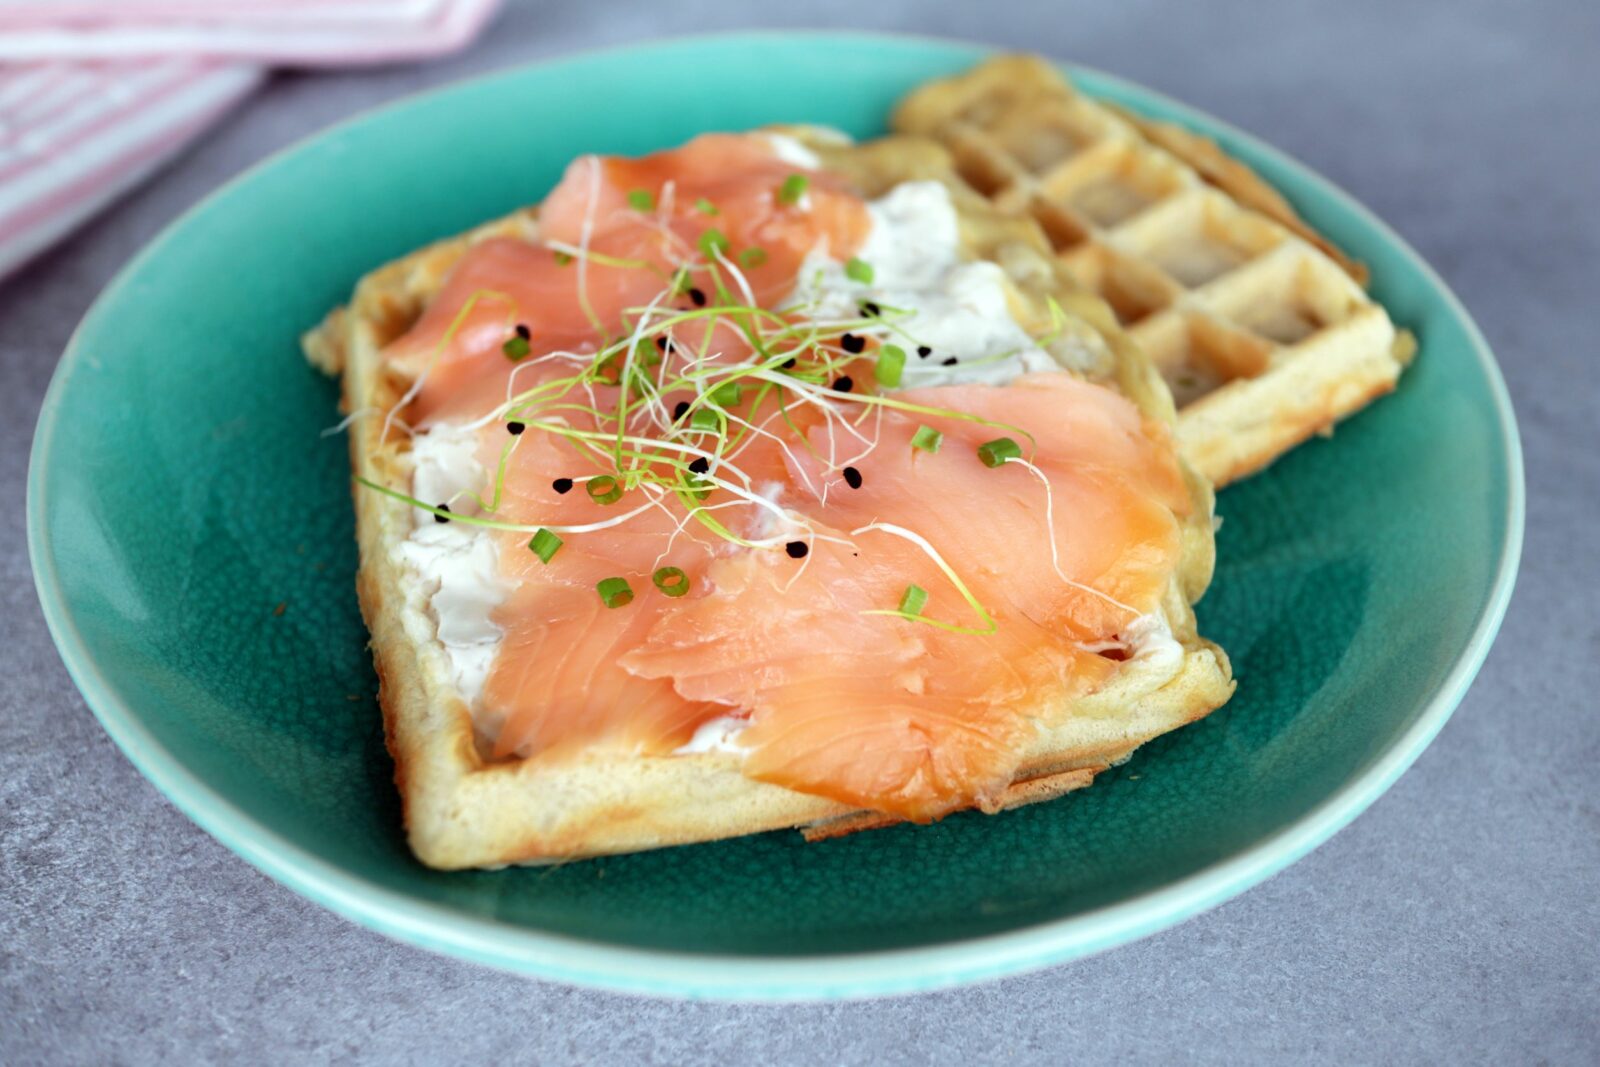 Courgette waffles with smoked salmon on top